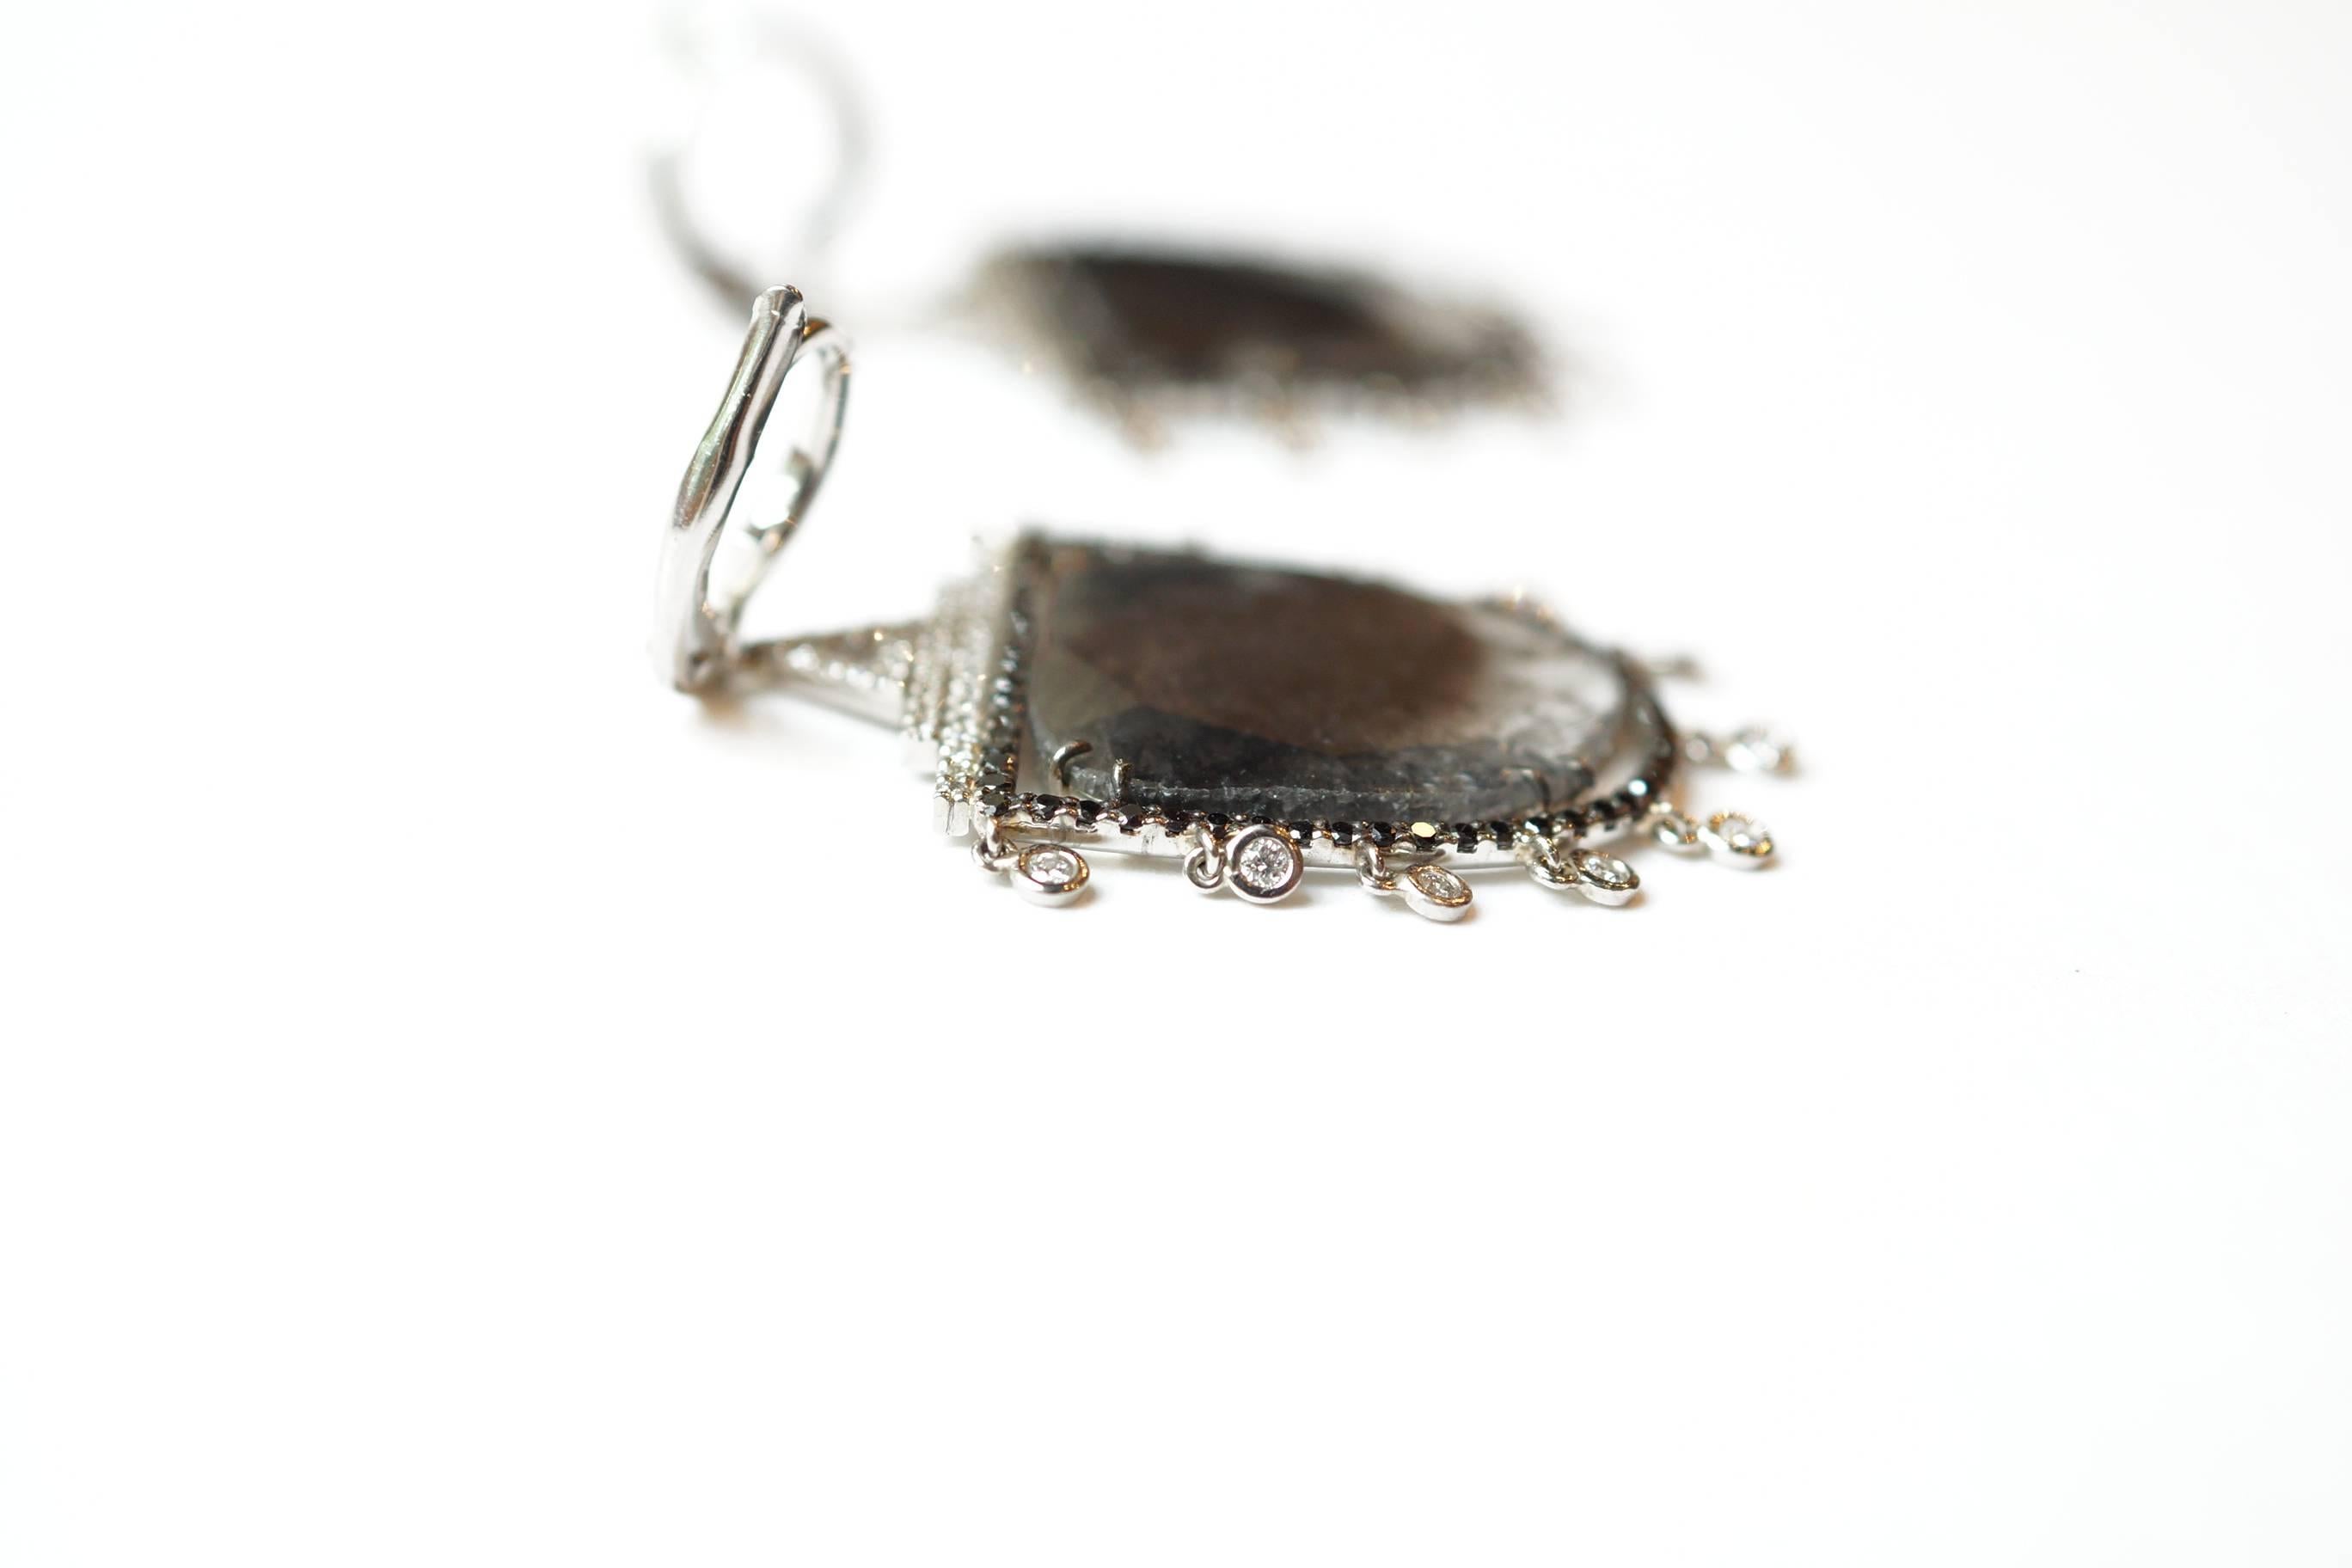 Danni Eardrops
A large pair of platinum eardrops, composed of a pair of large natural dark grey diamonds, which have been encased in black diamonds.  These eardrops are suspended from a white diamond-encrusted earwire, followed by three rows of